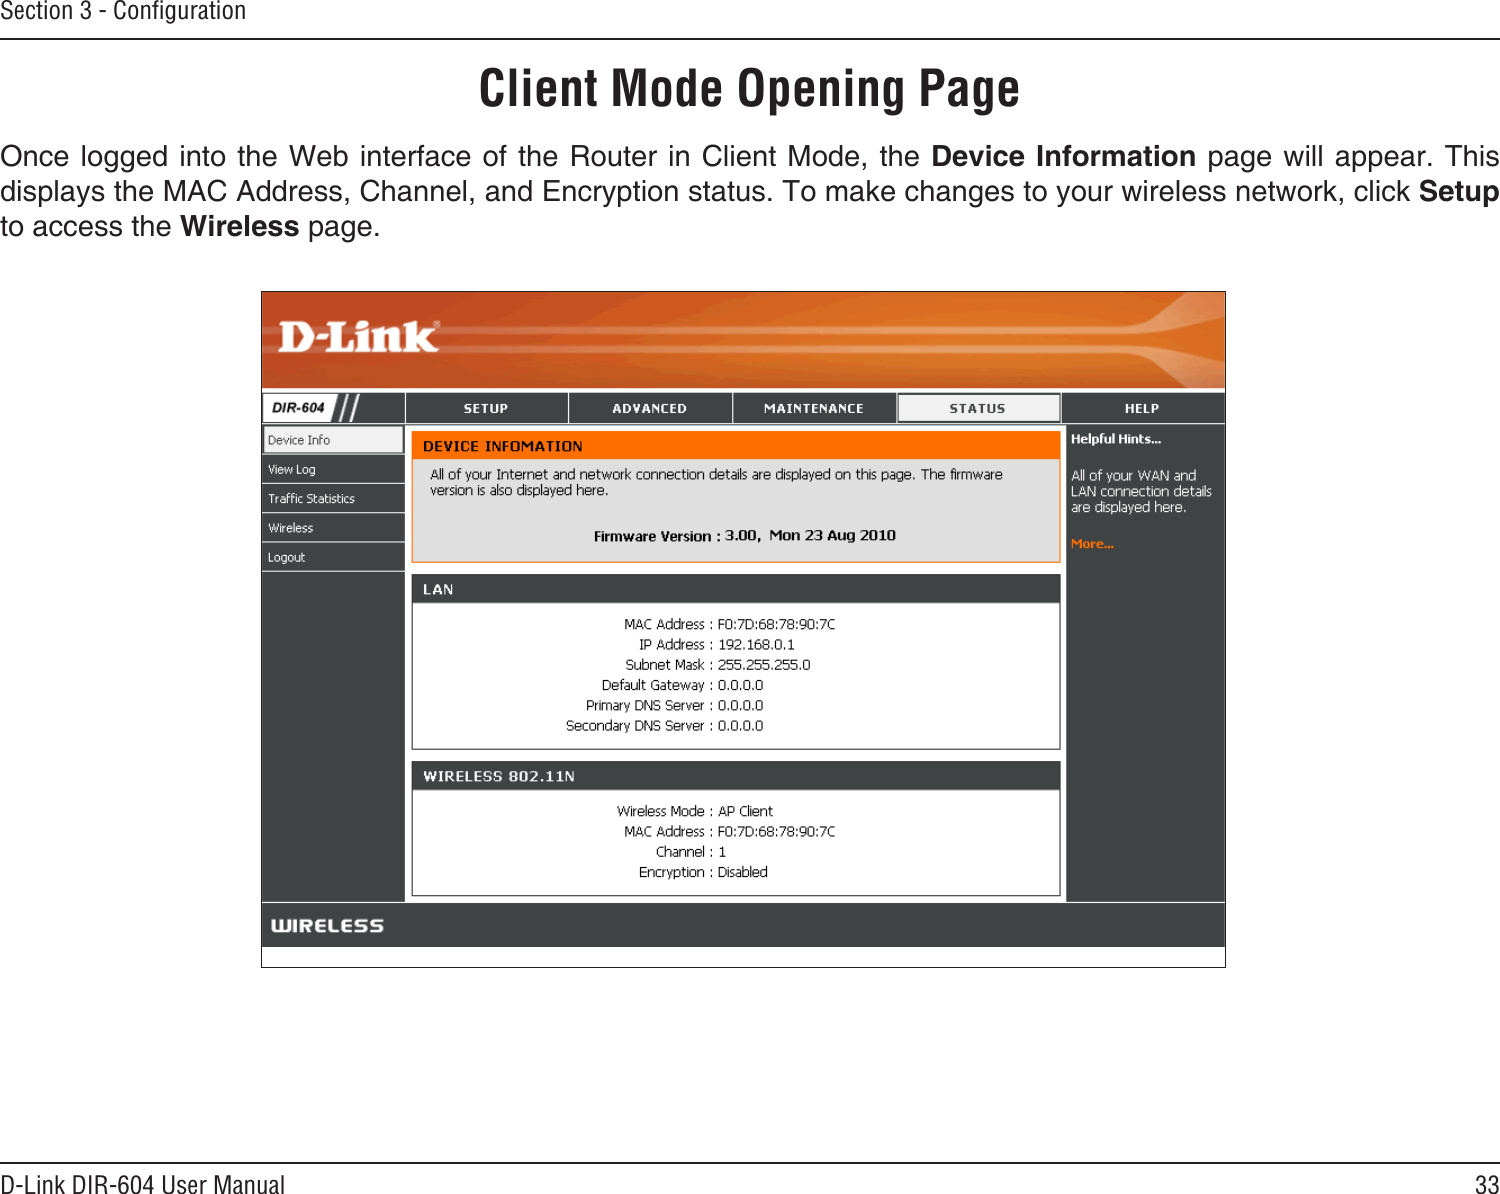 33D-Link DIR-604 User ManualSection 3 - ConﬁgurationClient Mode Opening PageOnce logged into the Web interface of the Router in Client Mode, the Device Information page will appear. This displays the MAC Address, Channel, and Encryption status. To make changes to your wireless network, click Setup to access the Wireless page.